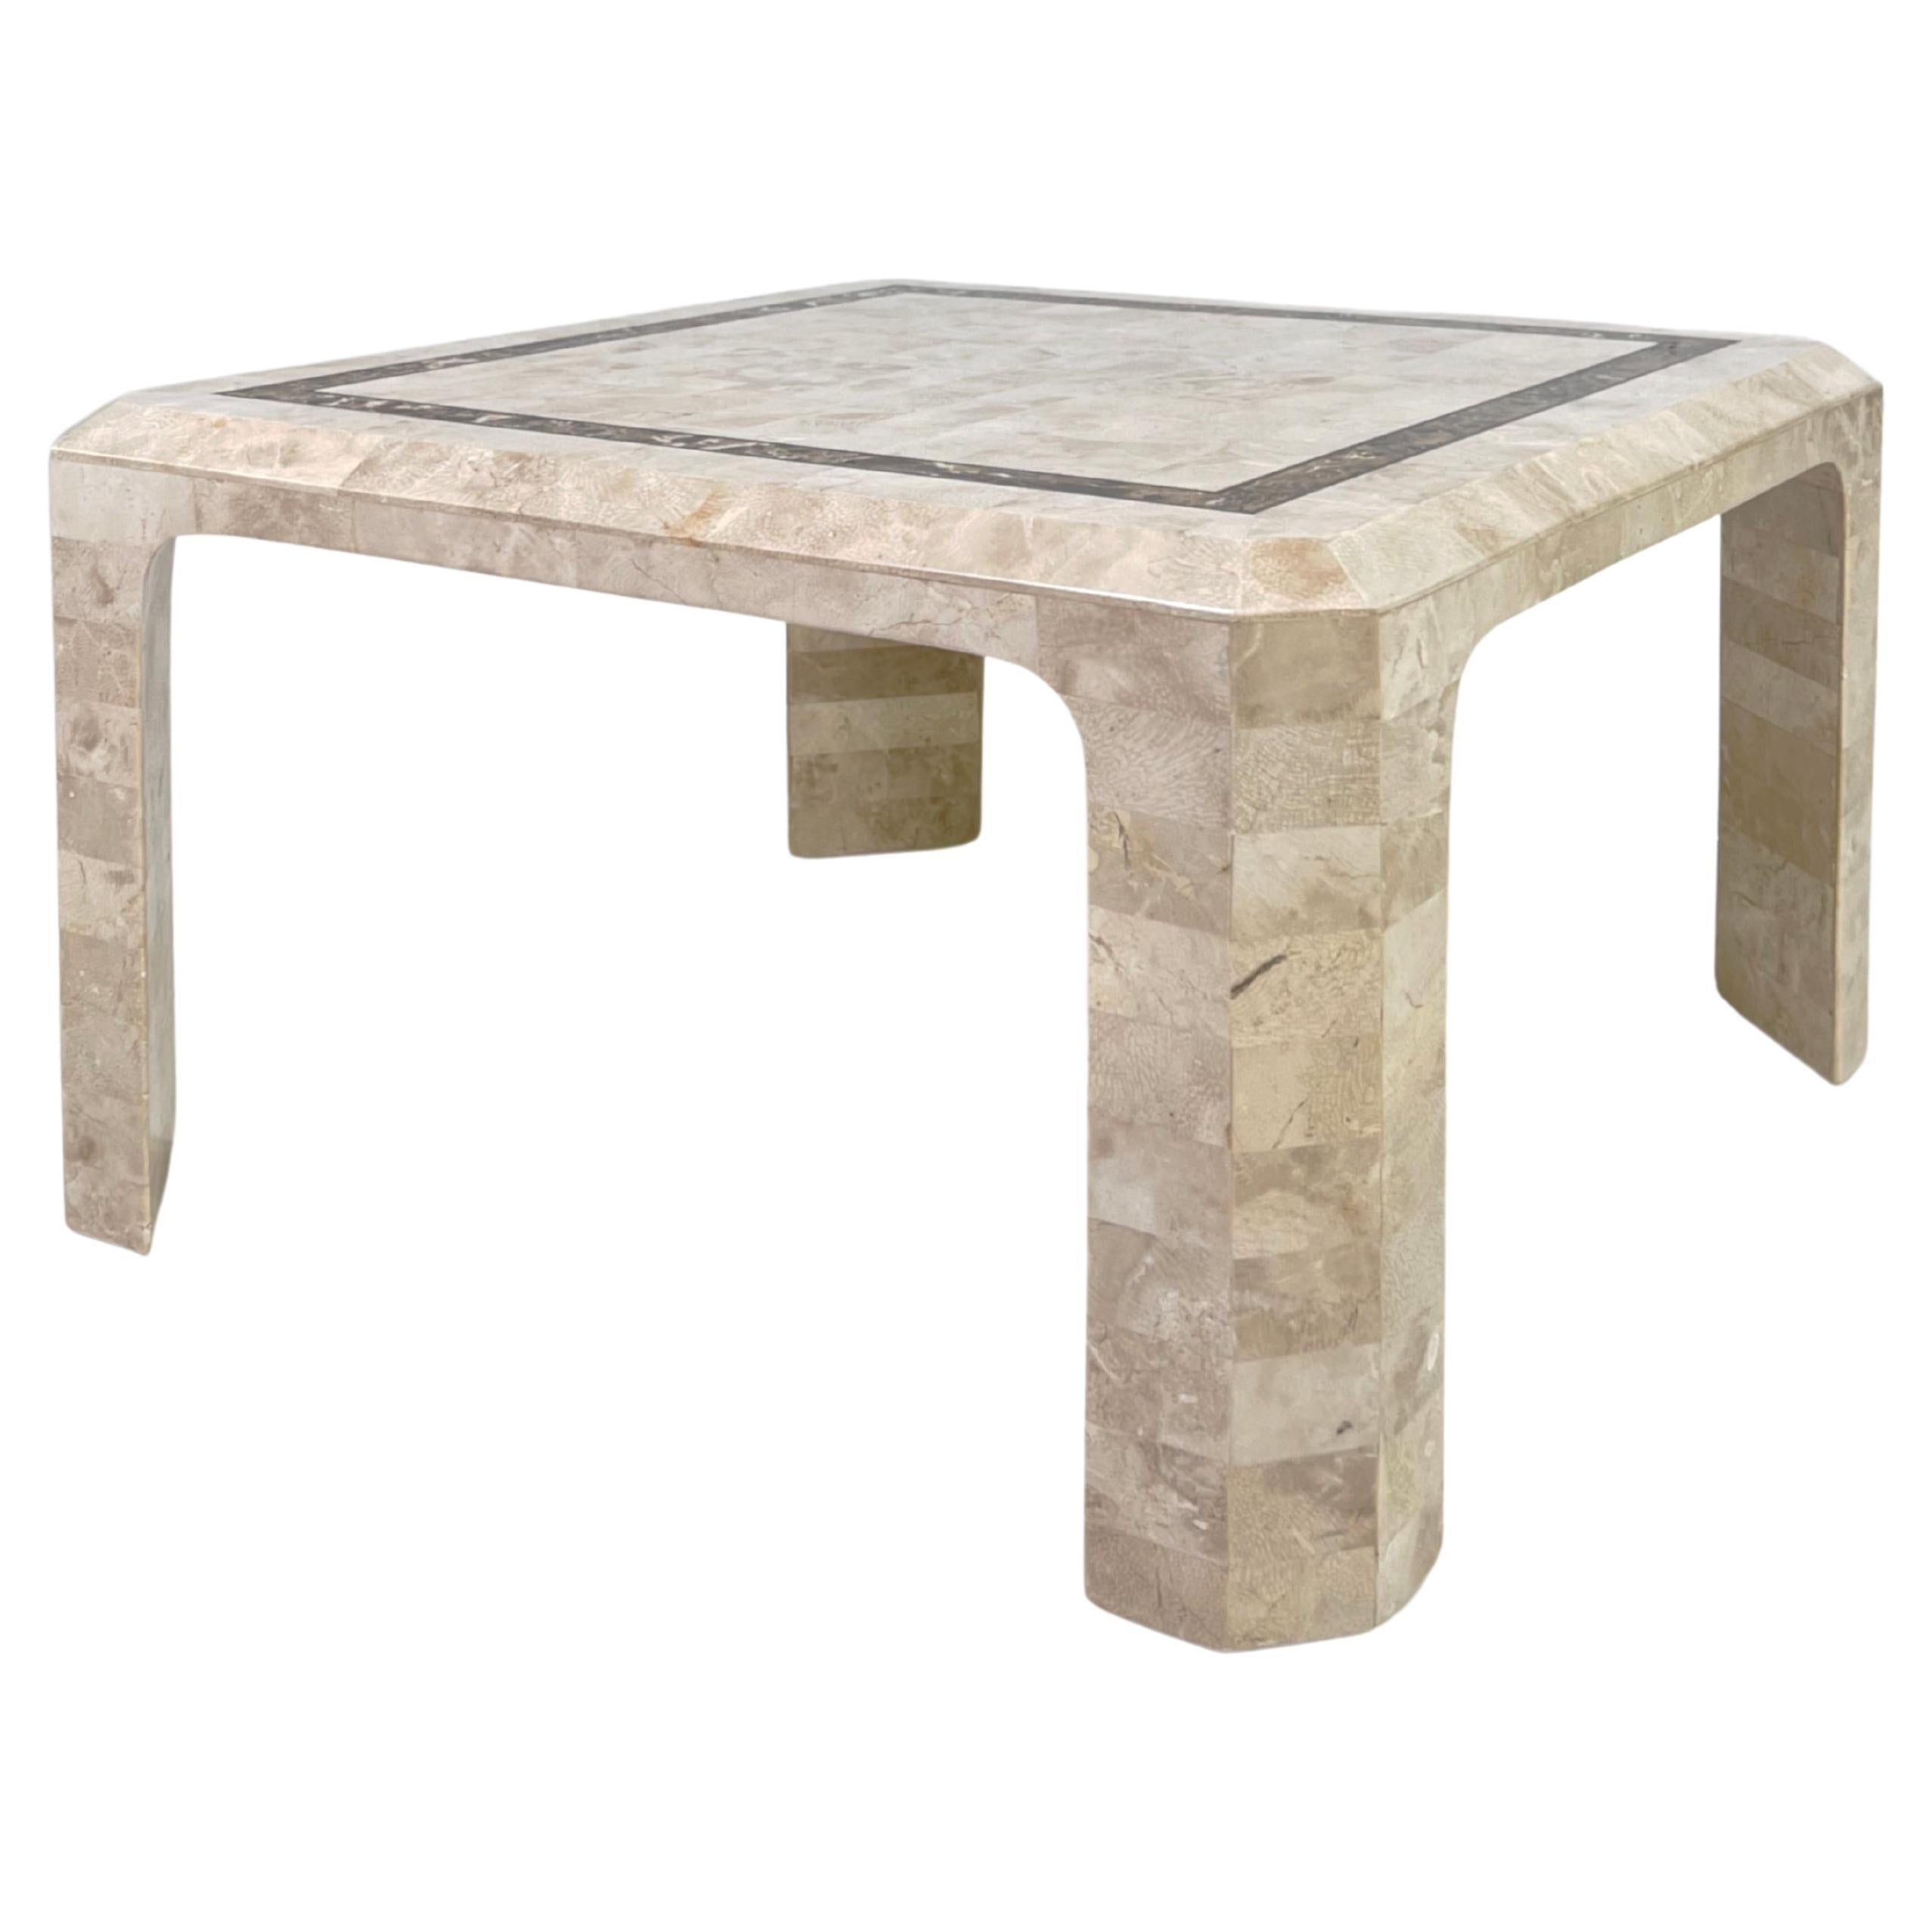 Maitland Smith Tessellated Stone Square Coffee Table